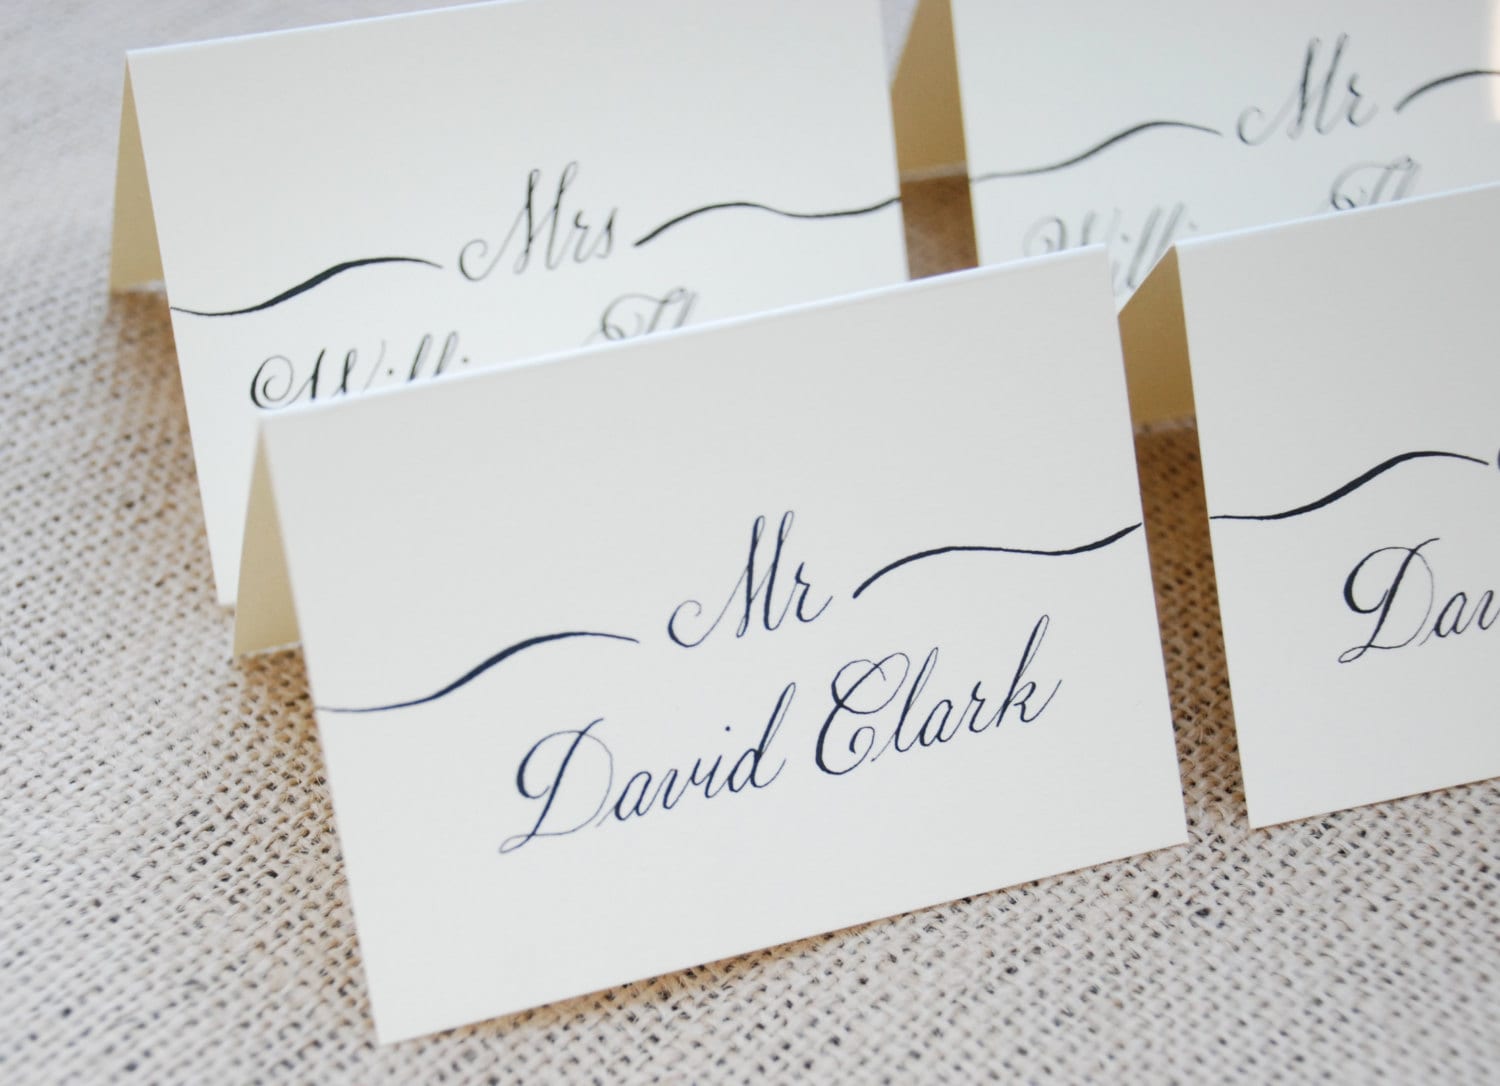 How To Make Table Place Cards In Word